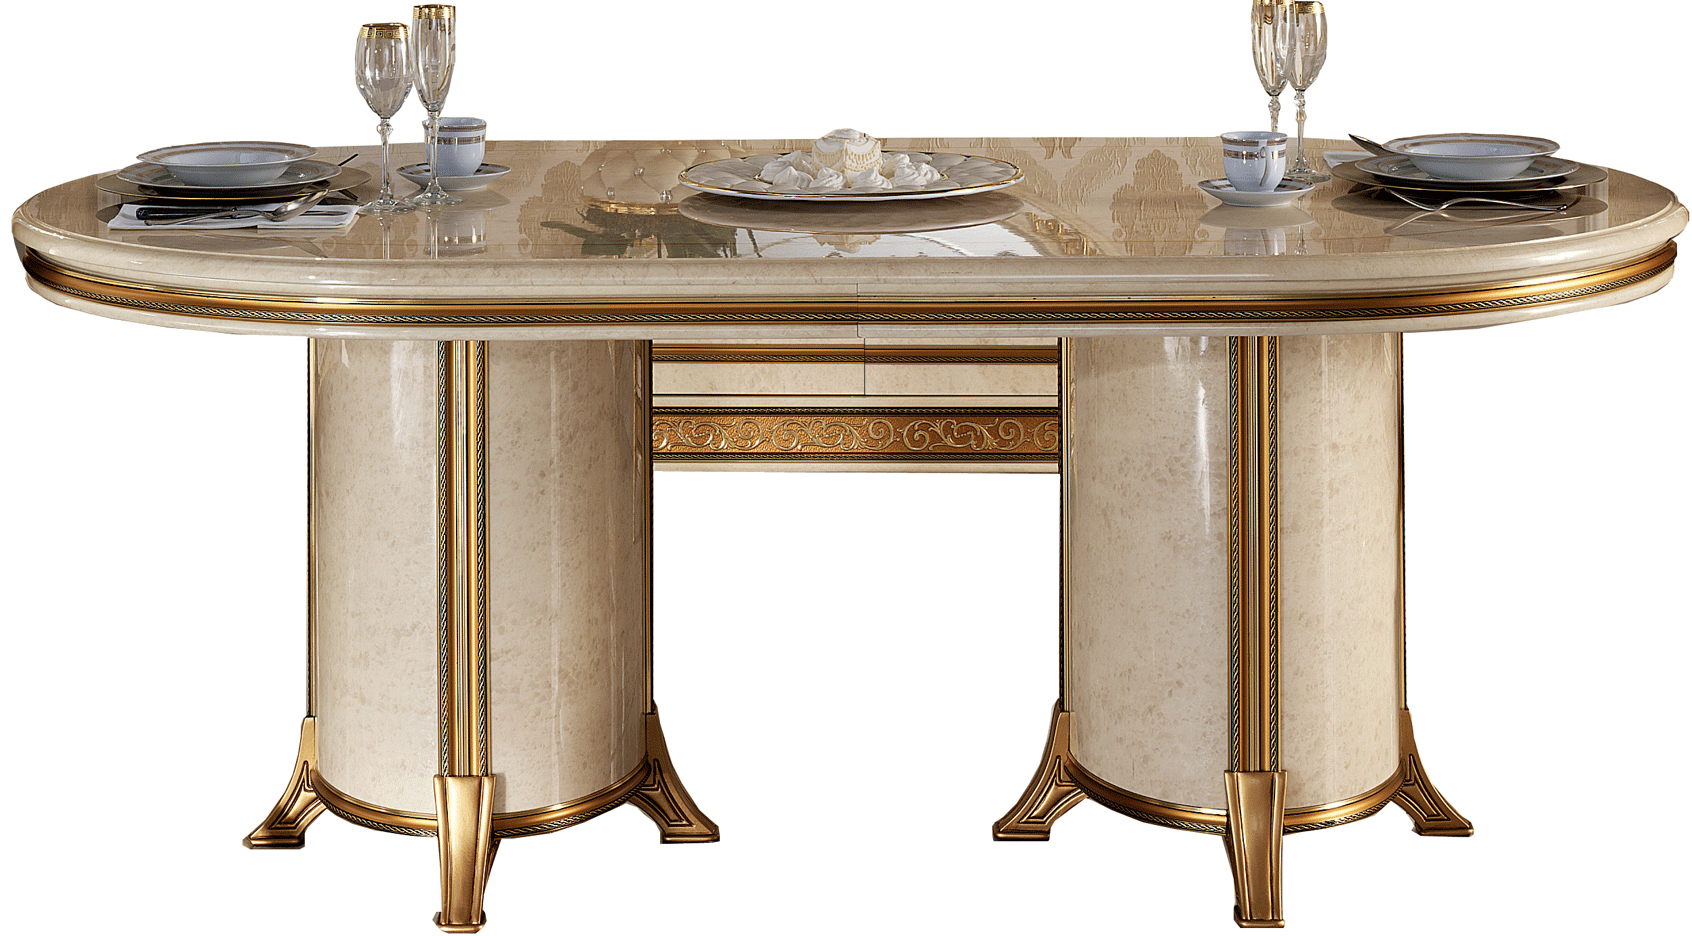 Brands Arredoclassic Dining Room, Italy Melodia Dining Table